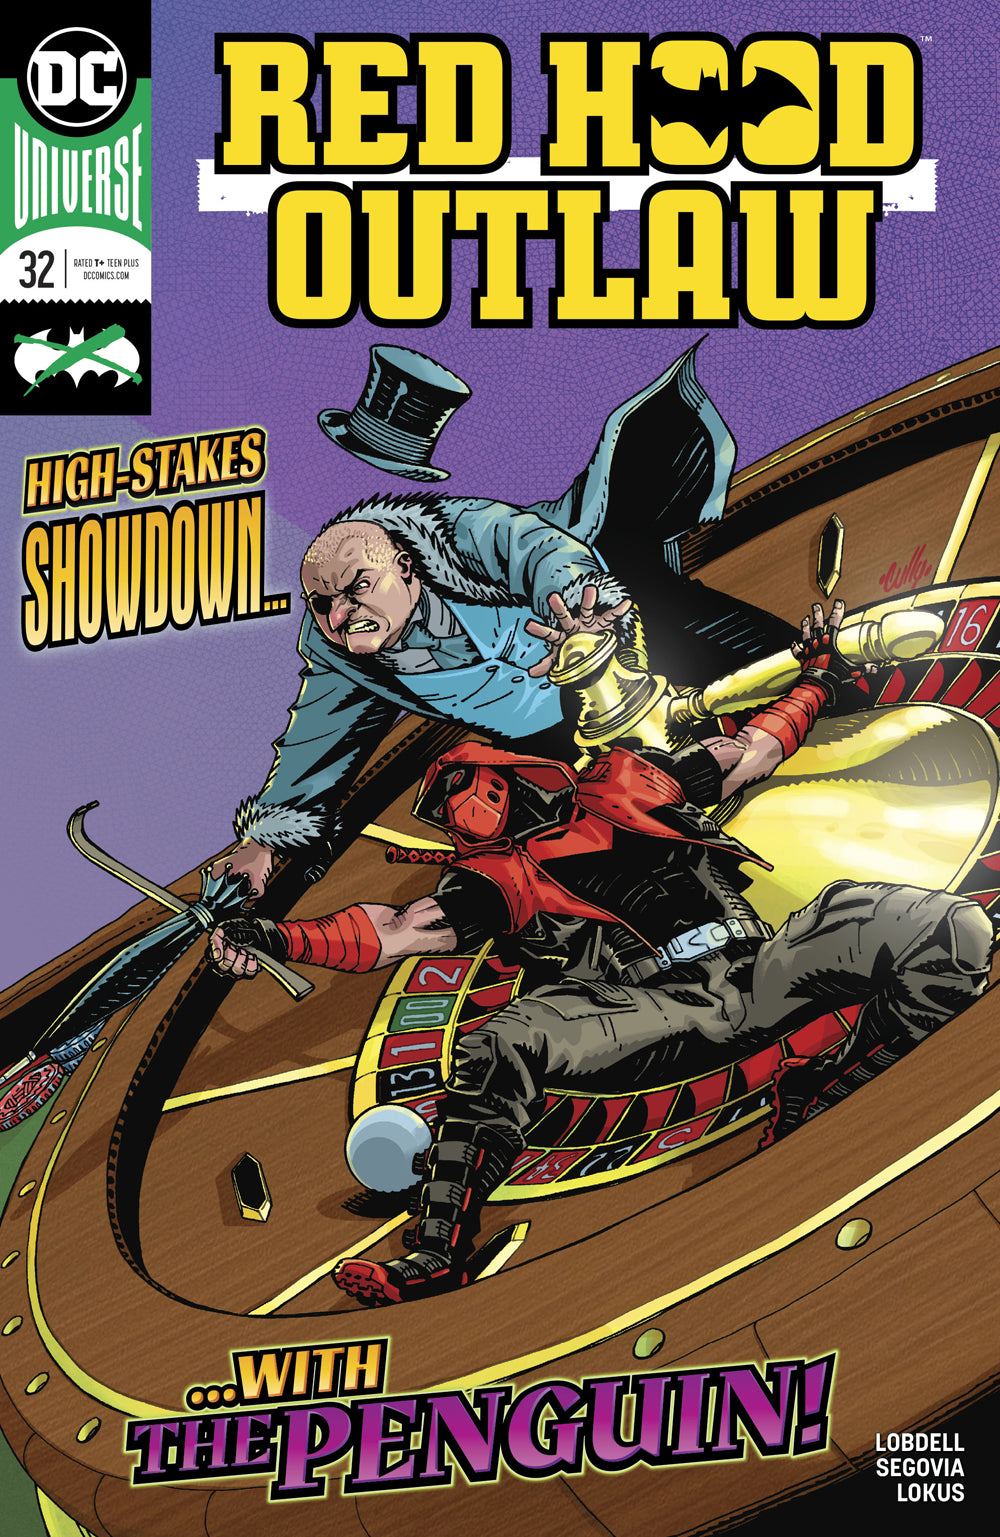 RED HOOD OUTLAW #32 COVER